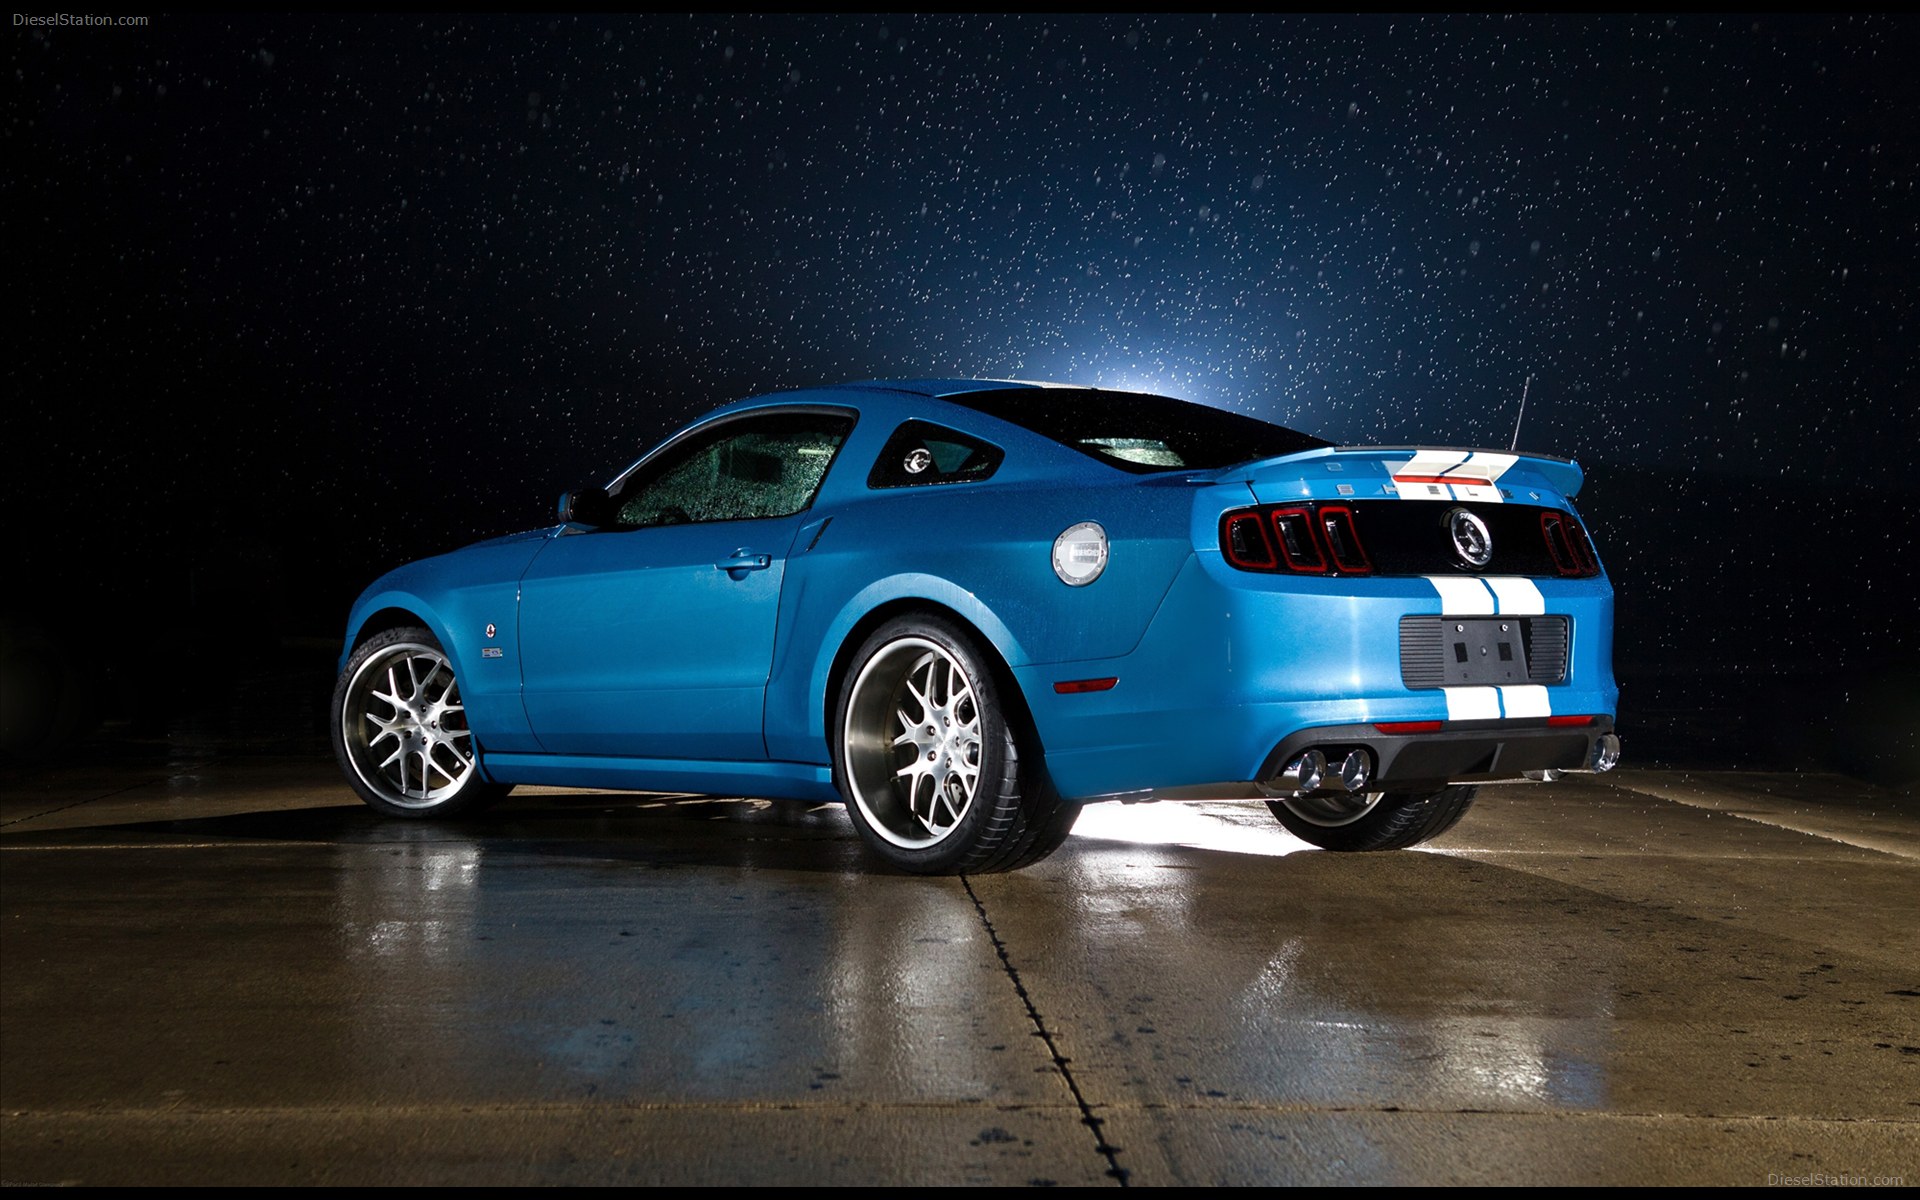 Ford Shelby Gt500 Cobra Widescreen Exotic Car Wallpaper Of